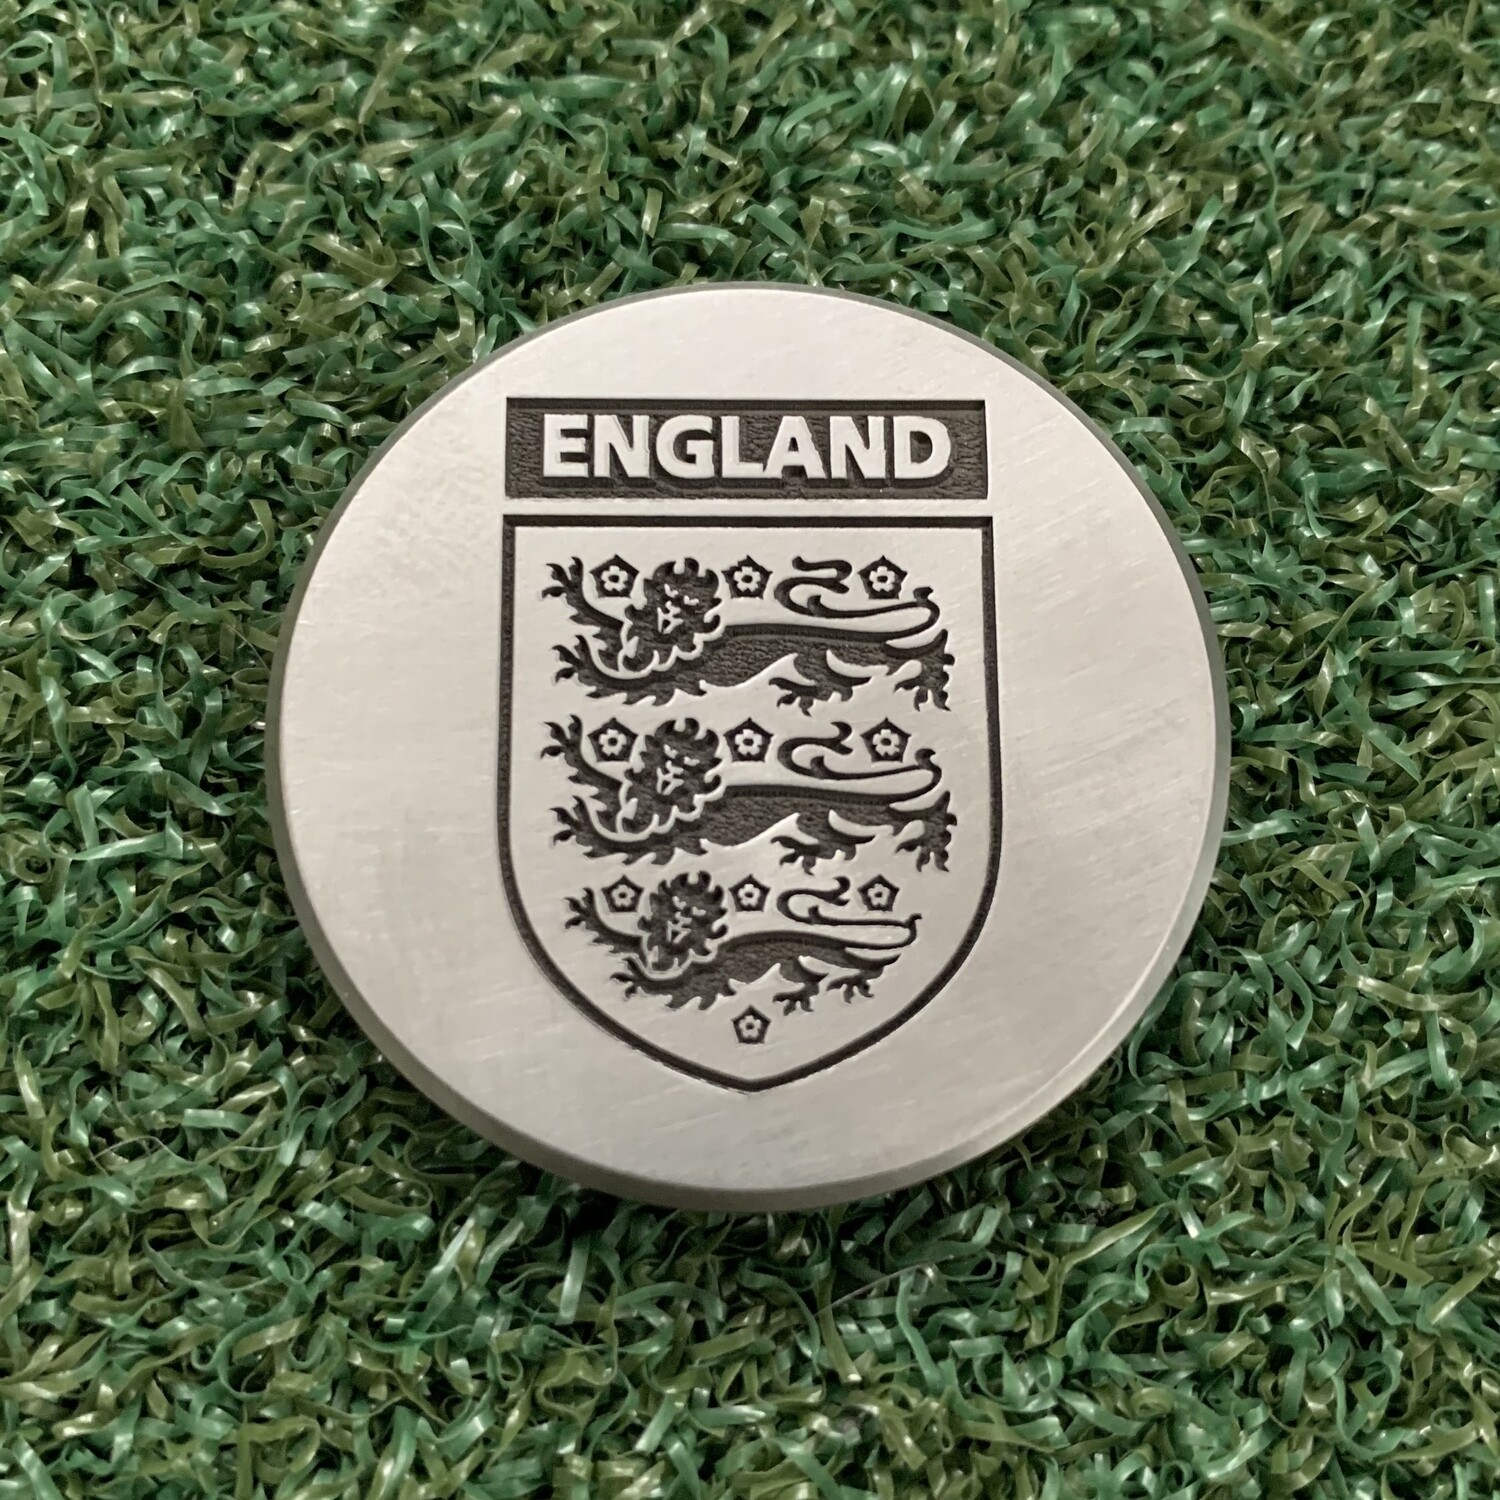 England “It’s Coming Home” Ball Marker